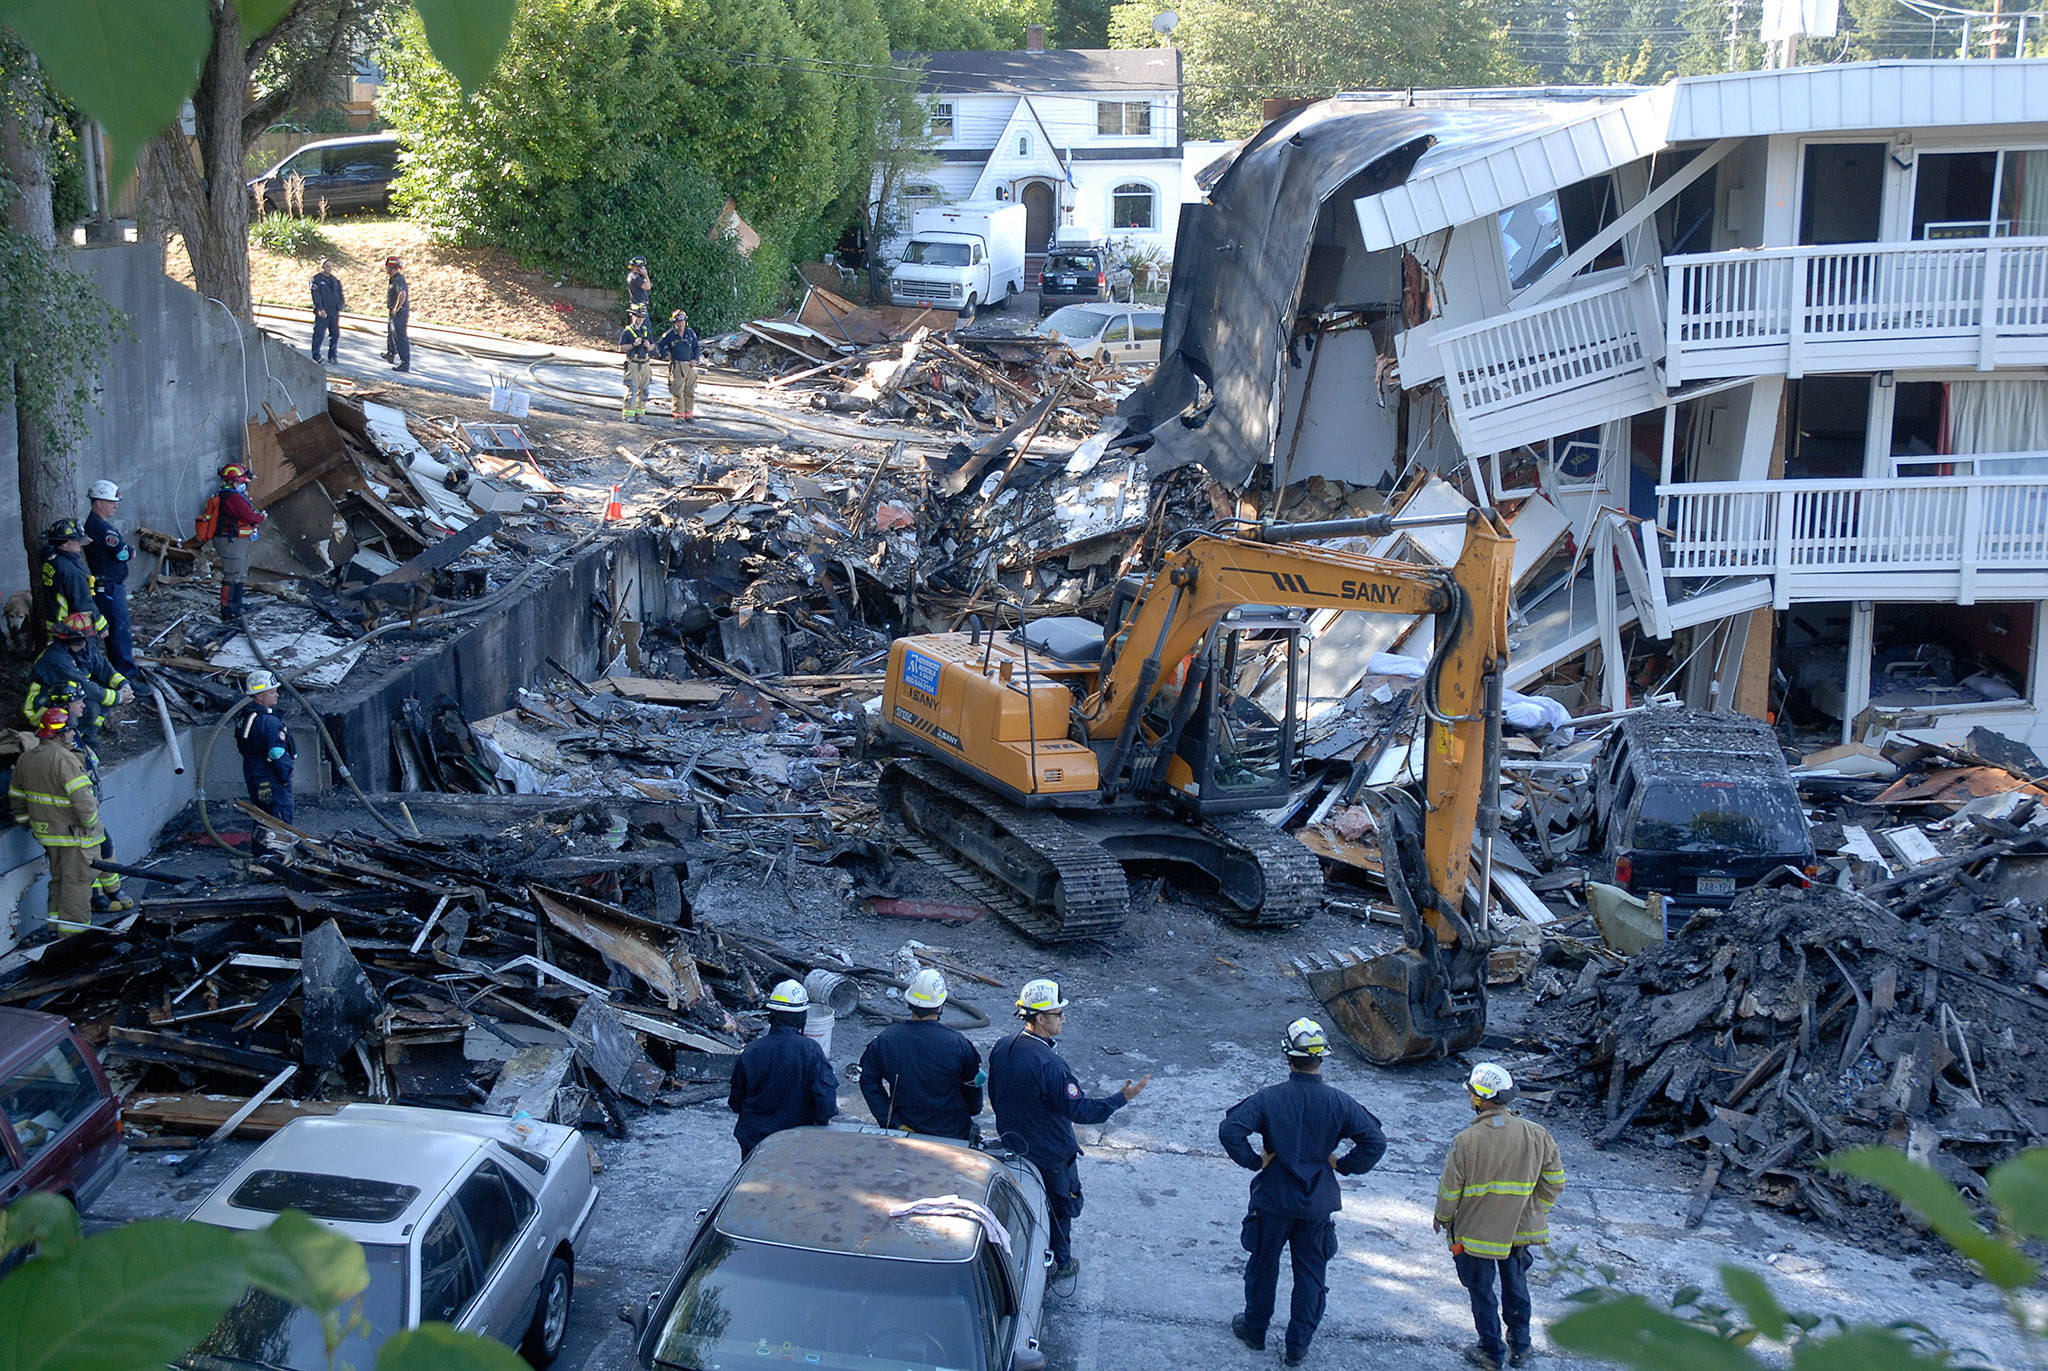 Responders look at the aftermath of an explosion at the Motel 6 on Kitsap Way Aug. 18, 2015.                                Kitsap News Group file photo